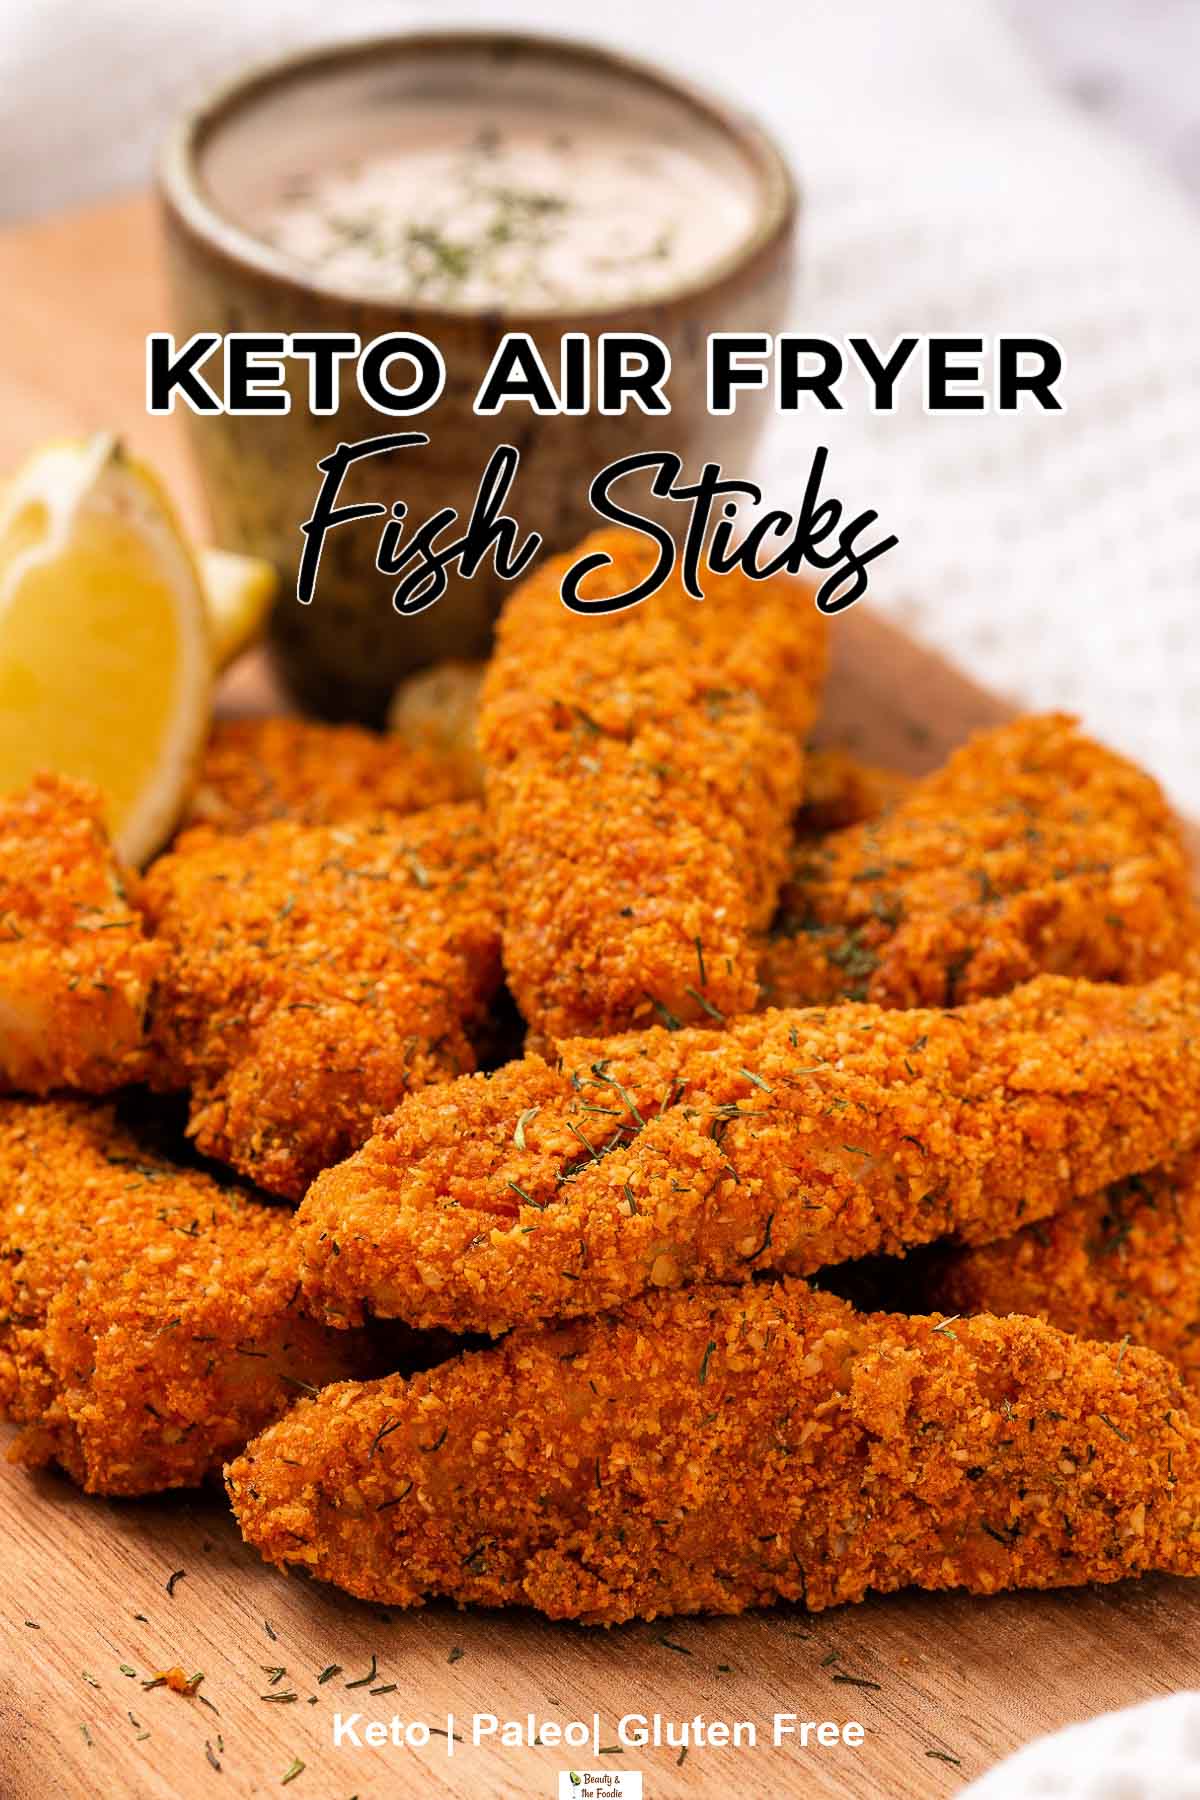 Air Fryer Fish sticks with a wedge of lemon and a pnch-bowl of tartar sauce on a cutting board.